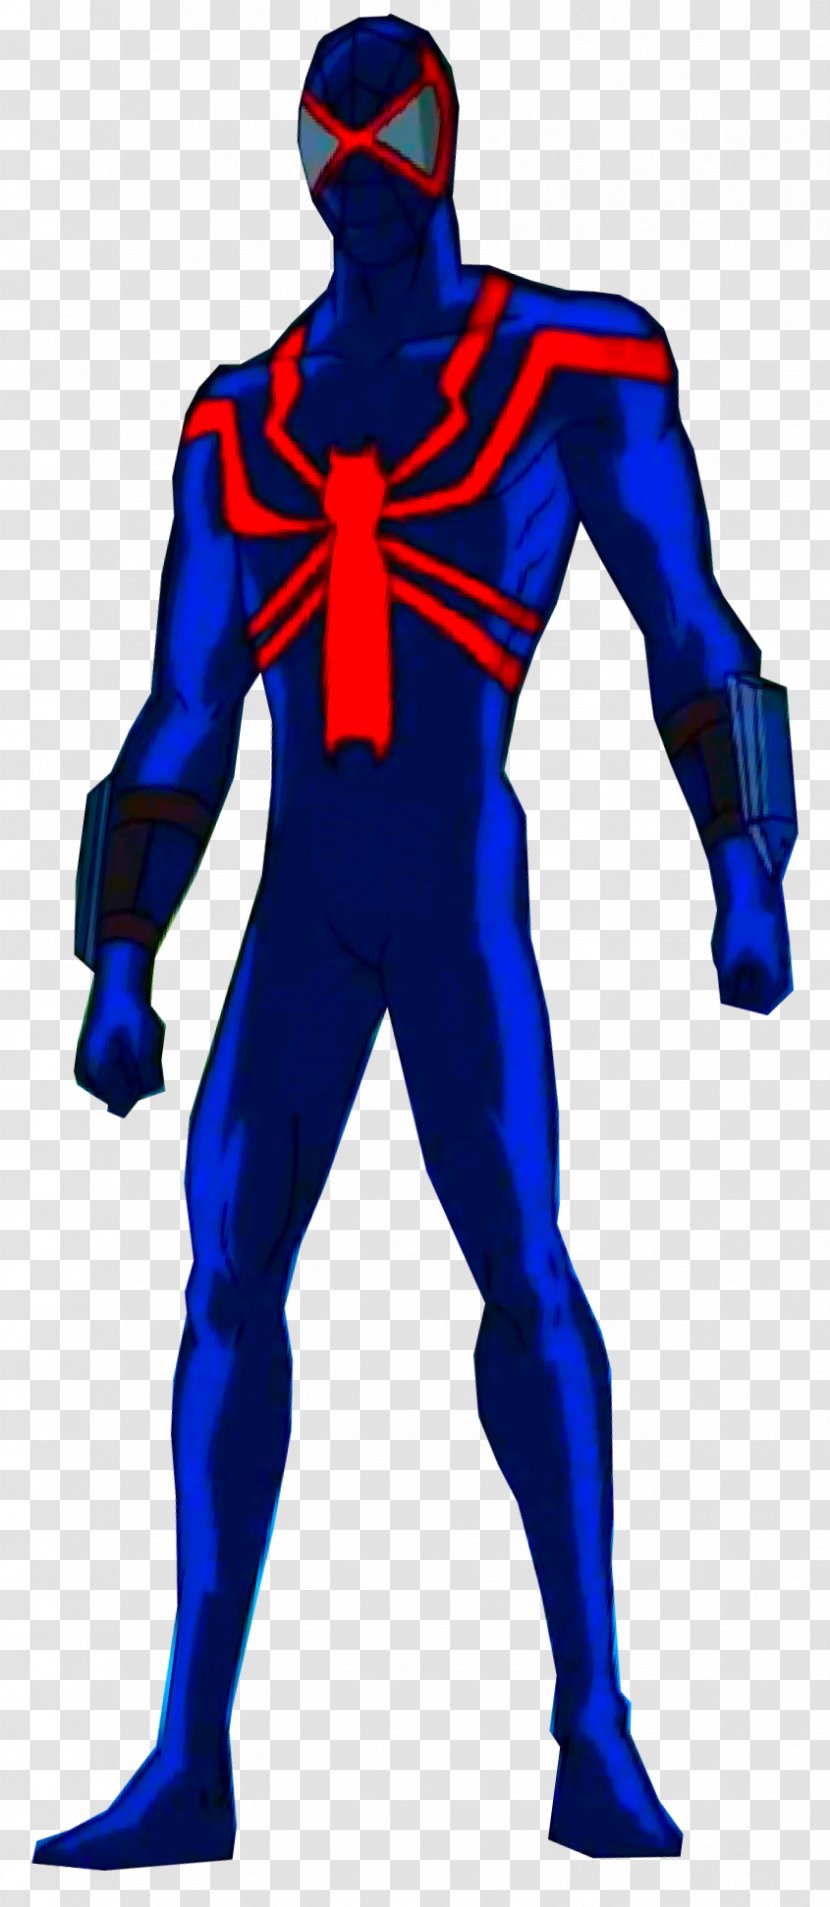 Spider-Man Captain America Gwen Stacy - Electric Blue - Spider-man Transparent PNG